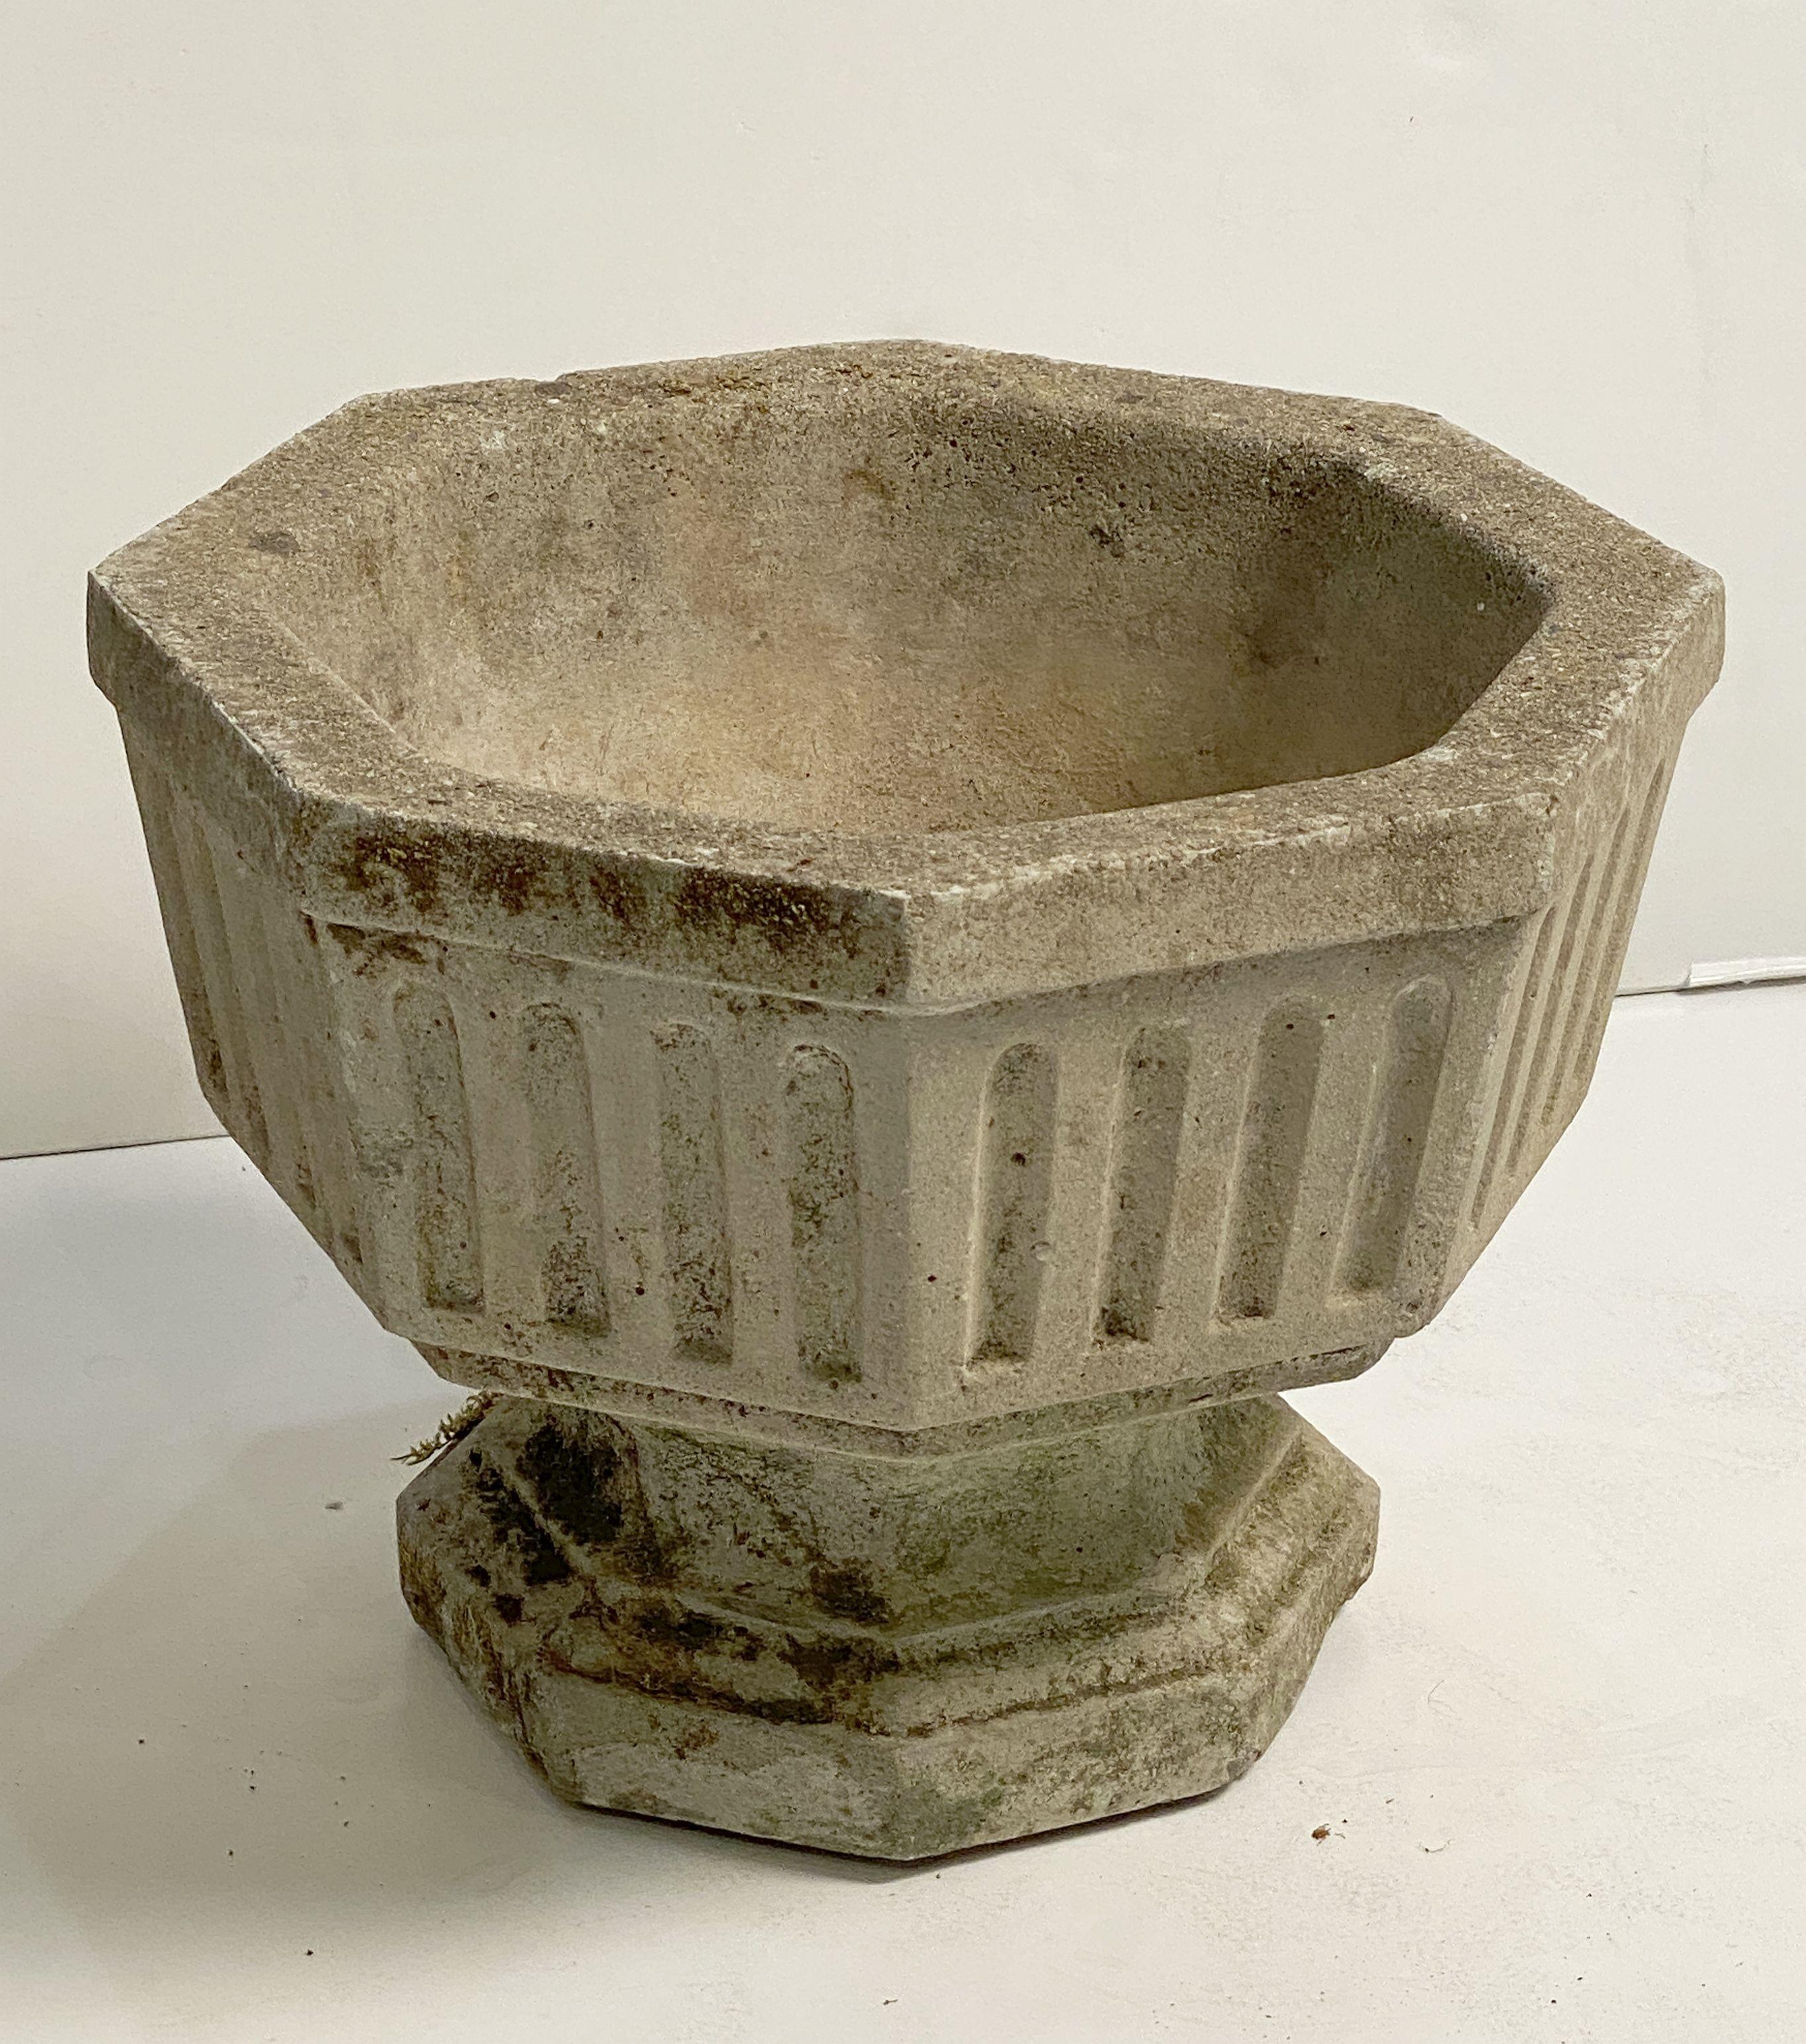 A fine pair of English octagonal garden urns or planter pots of composition stone - each planter featuring a relief design around the circumference over a raised eight-sided base.

Two available, individually priced, $1395 each planter